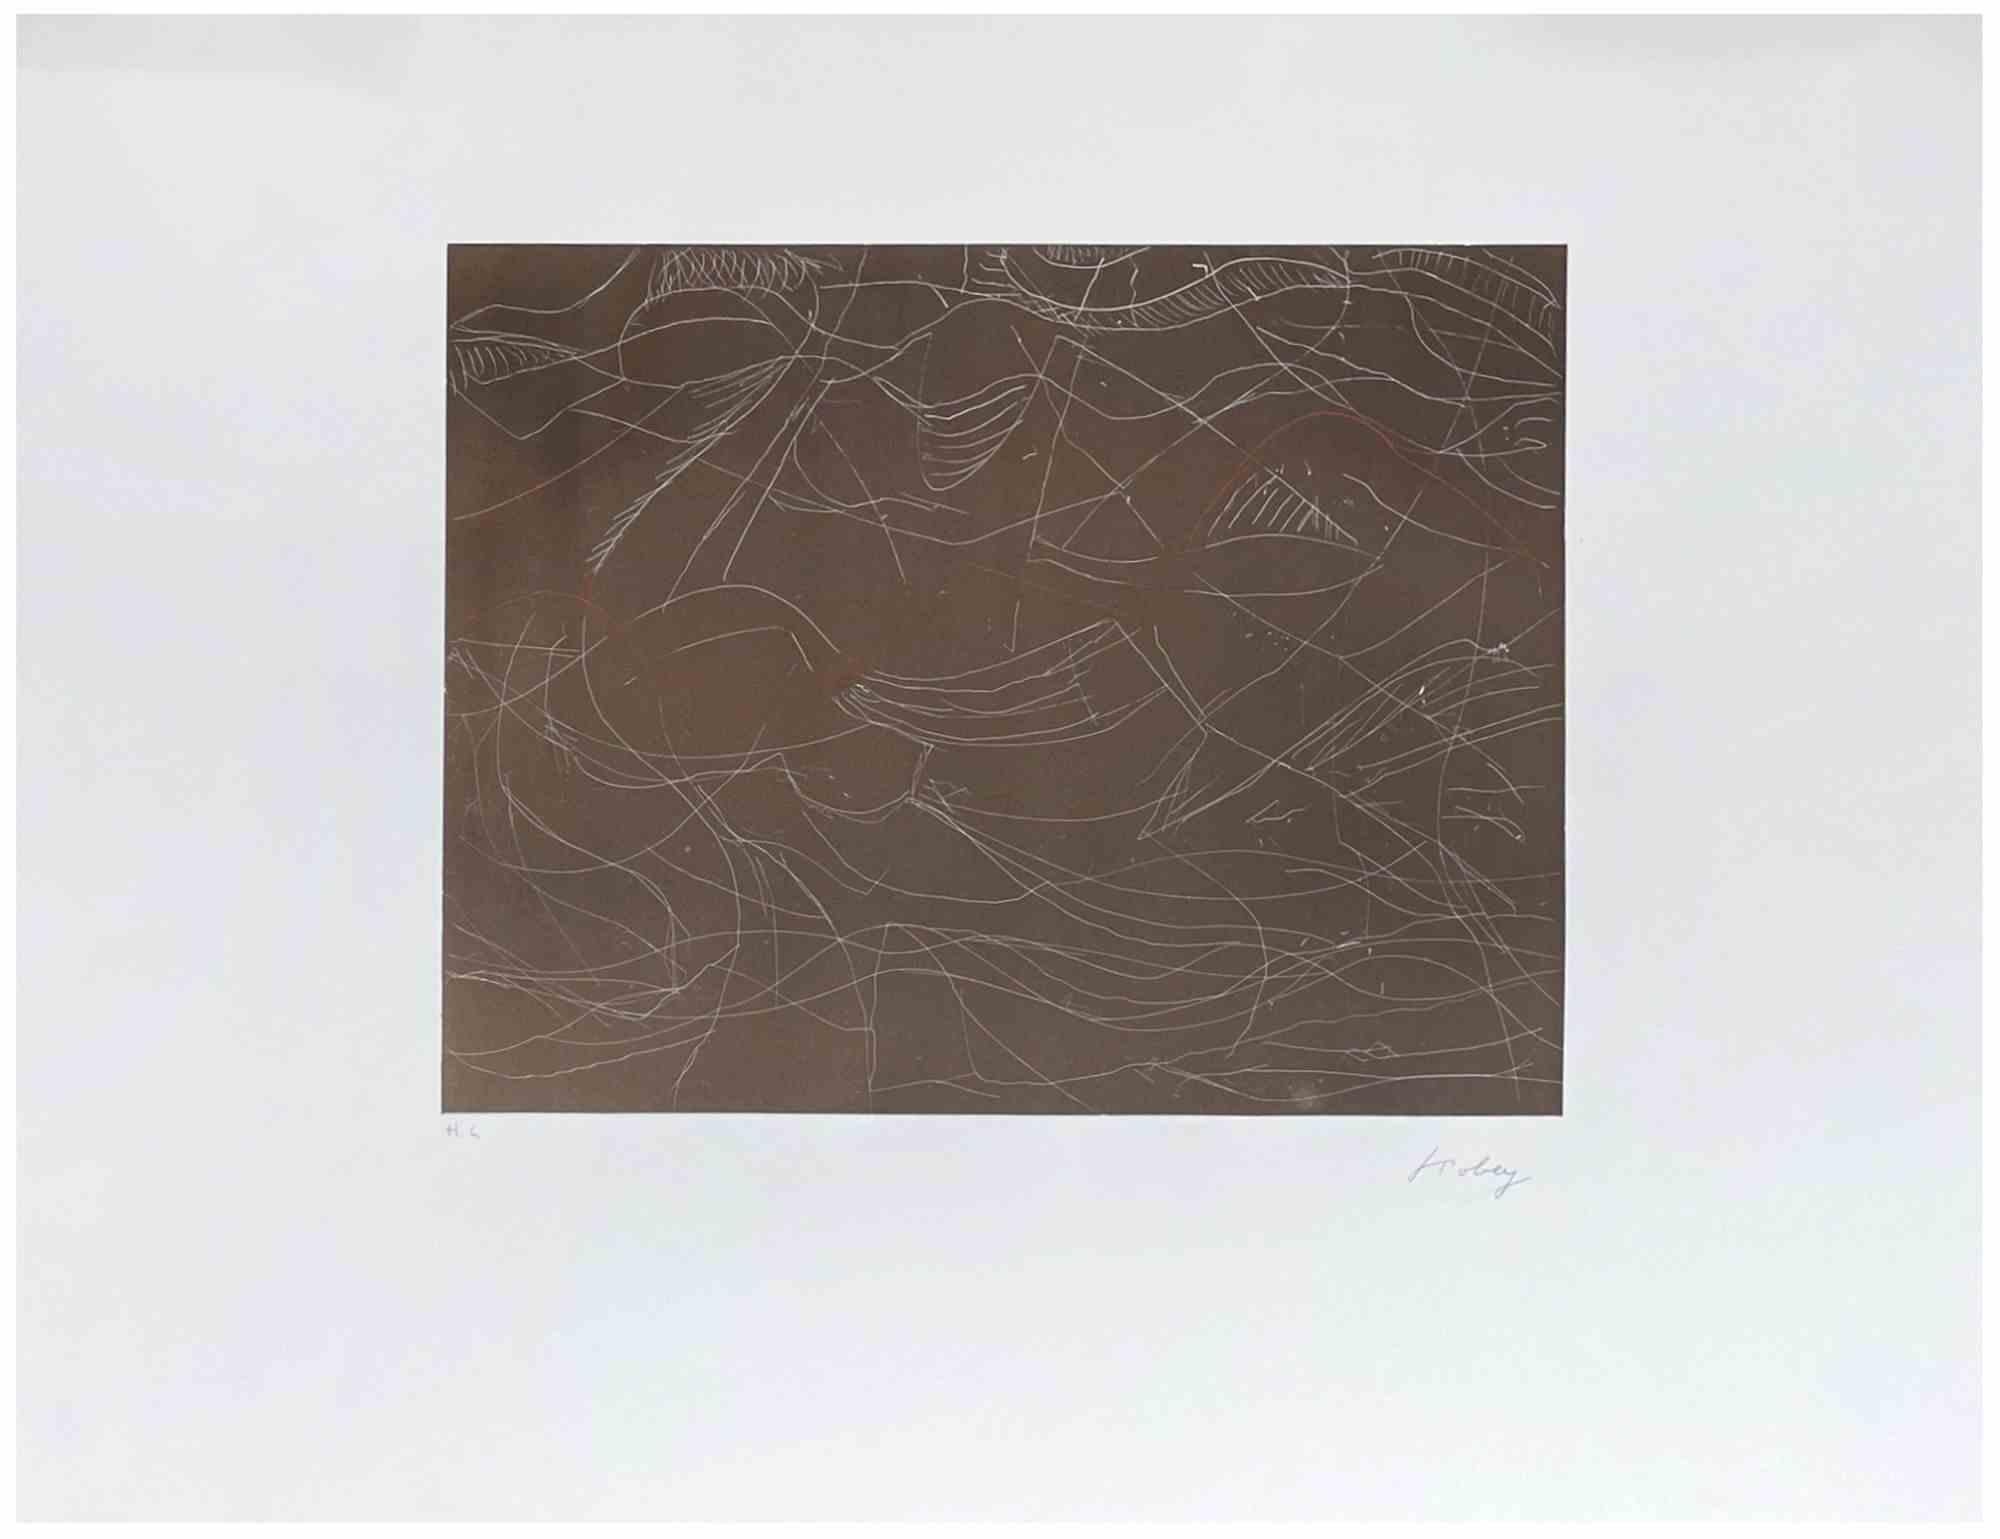 Abstract Composition is an artwork realized by Mark Tobey in 1975. 
Etching on Wove Paper, Signed and marked H.C.
Published by Baukunst Galerie, Koln. Prov. Coll Jorg Kees. 
Hand signed in the lower right part. 
Very good condition.